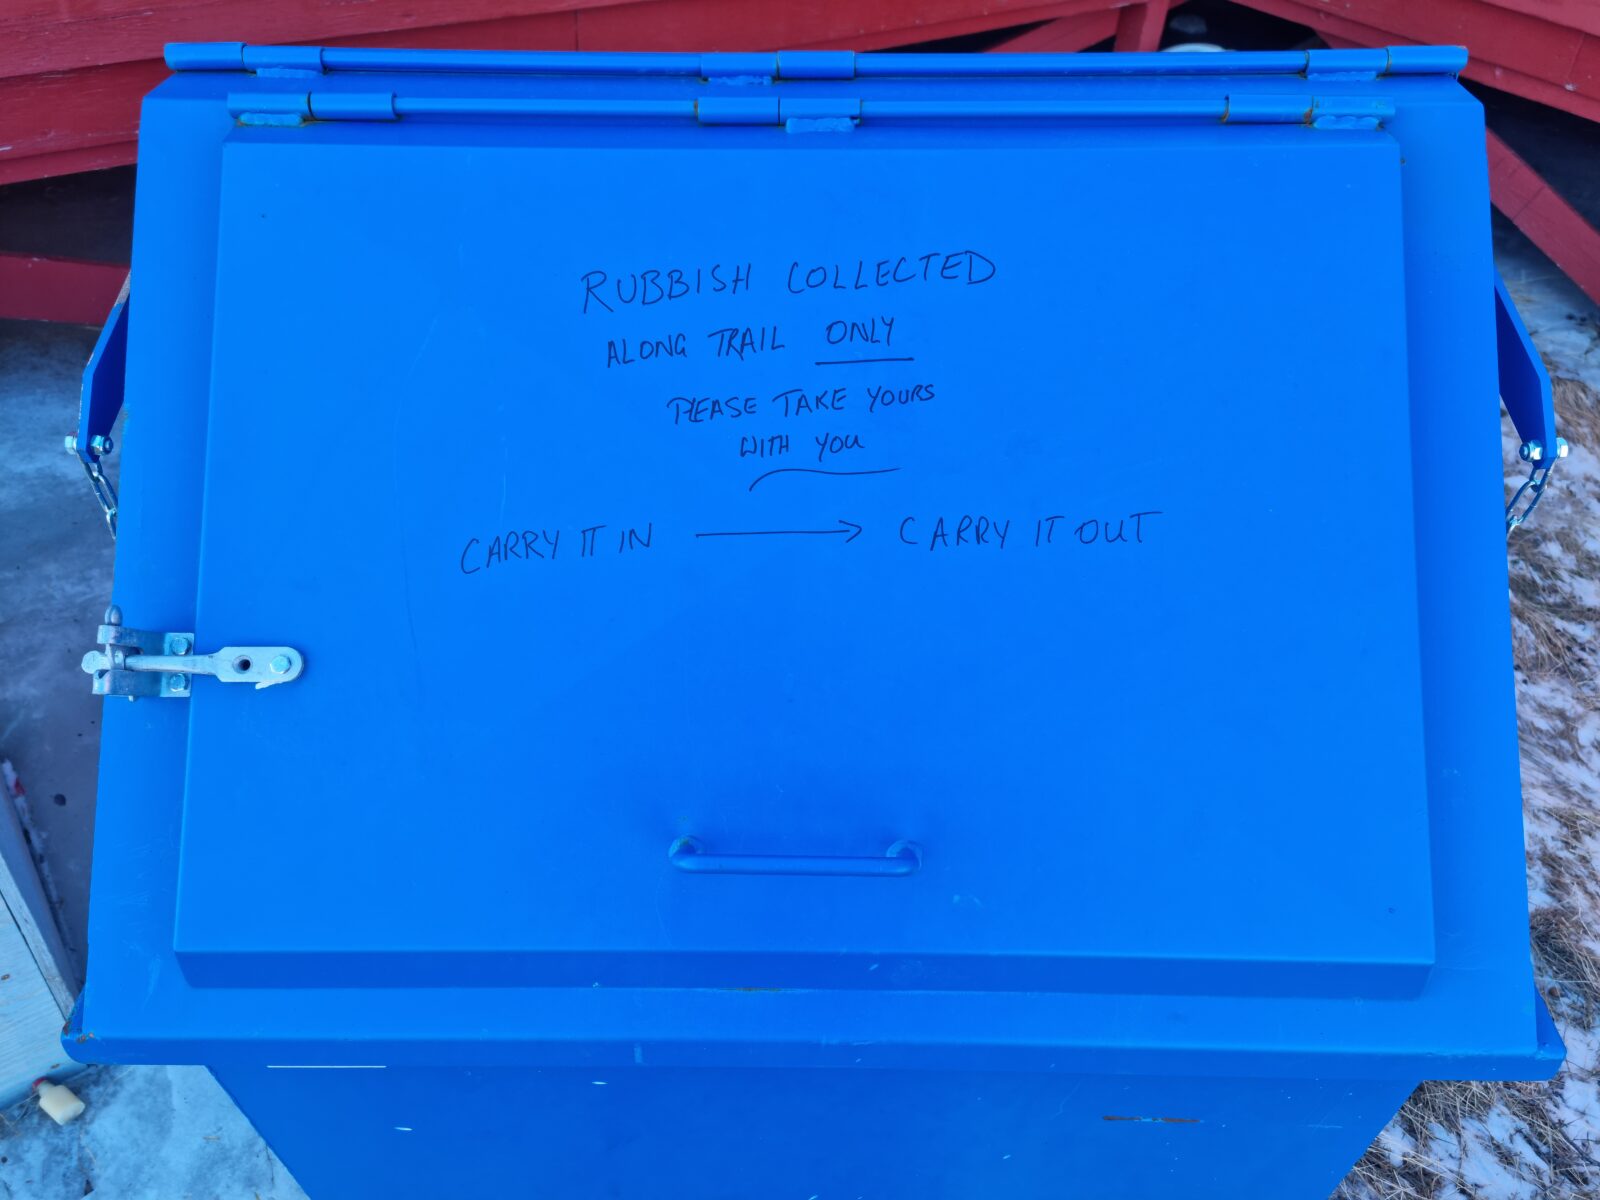 Reminder message to take your own trash with you, written on the lid of the bins at each hut along the Arctic Circle Trail